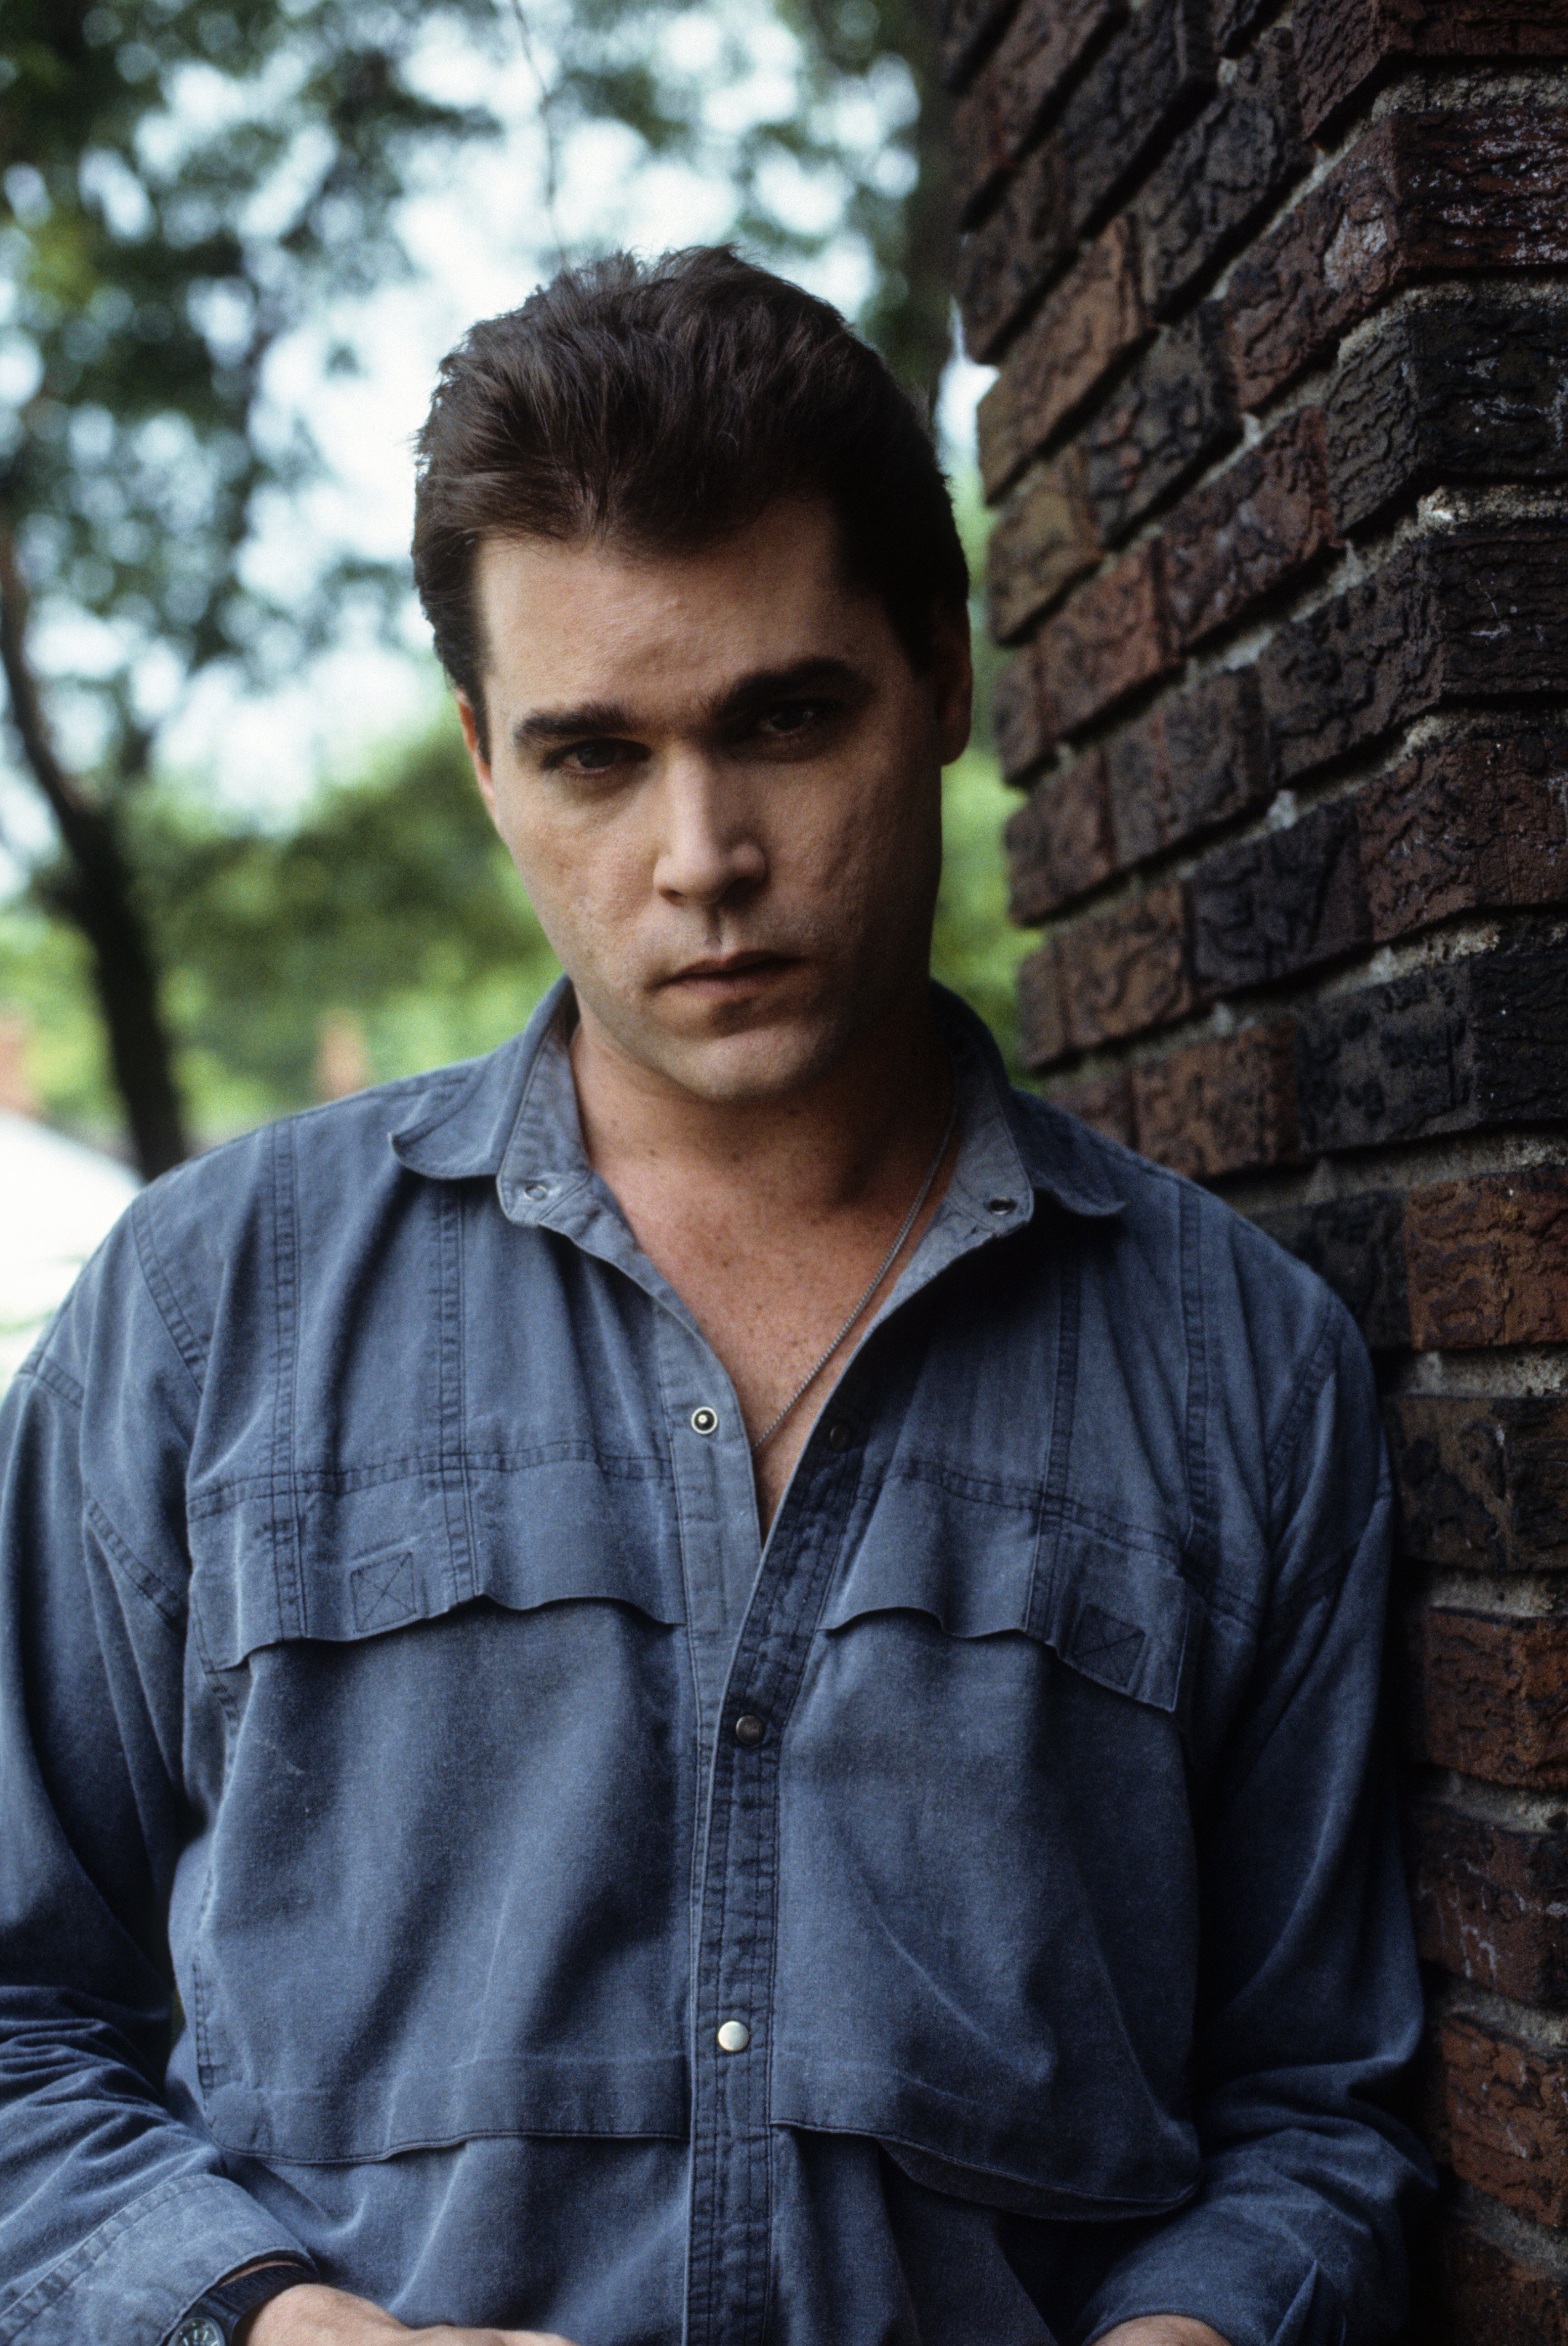 Ray Liotta posing outside in a scene from the film "Dominick and Eugene," in 1988. | Source: Orion Pictures/Getty Images